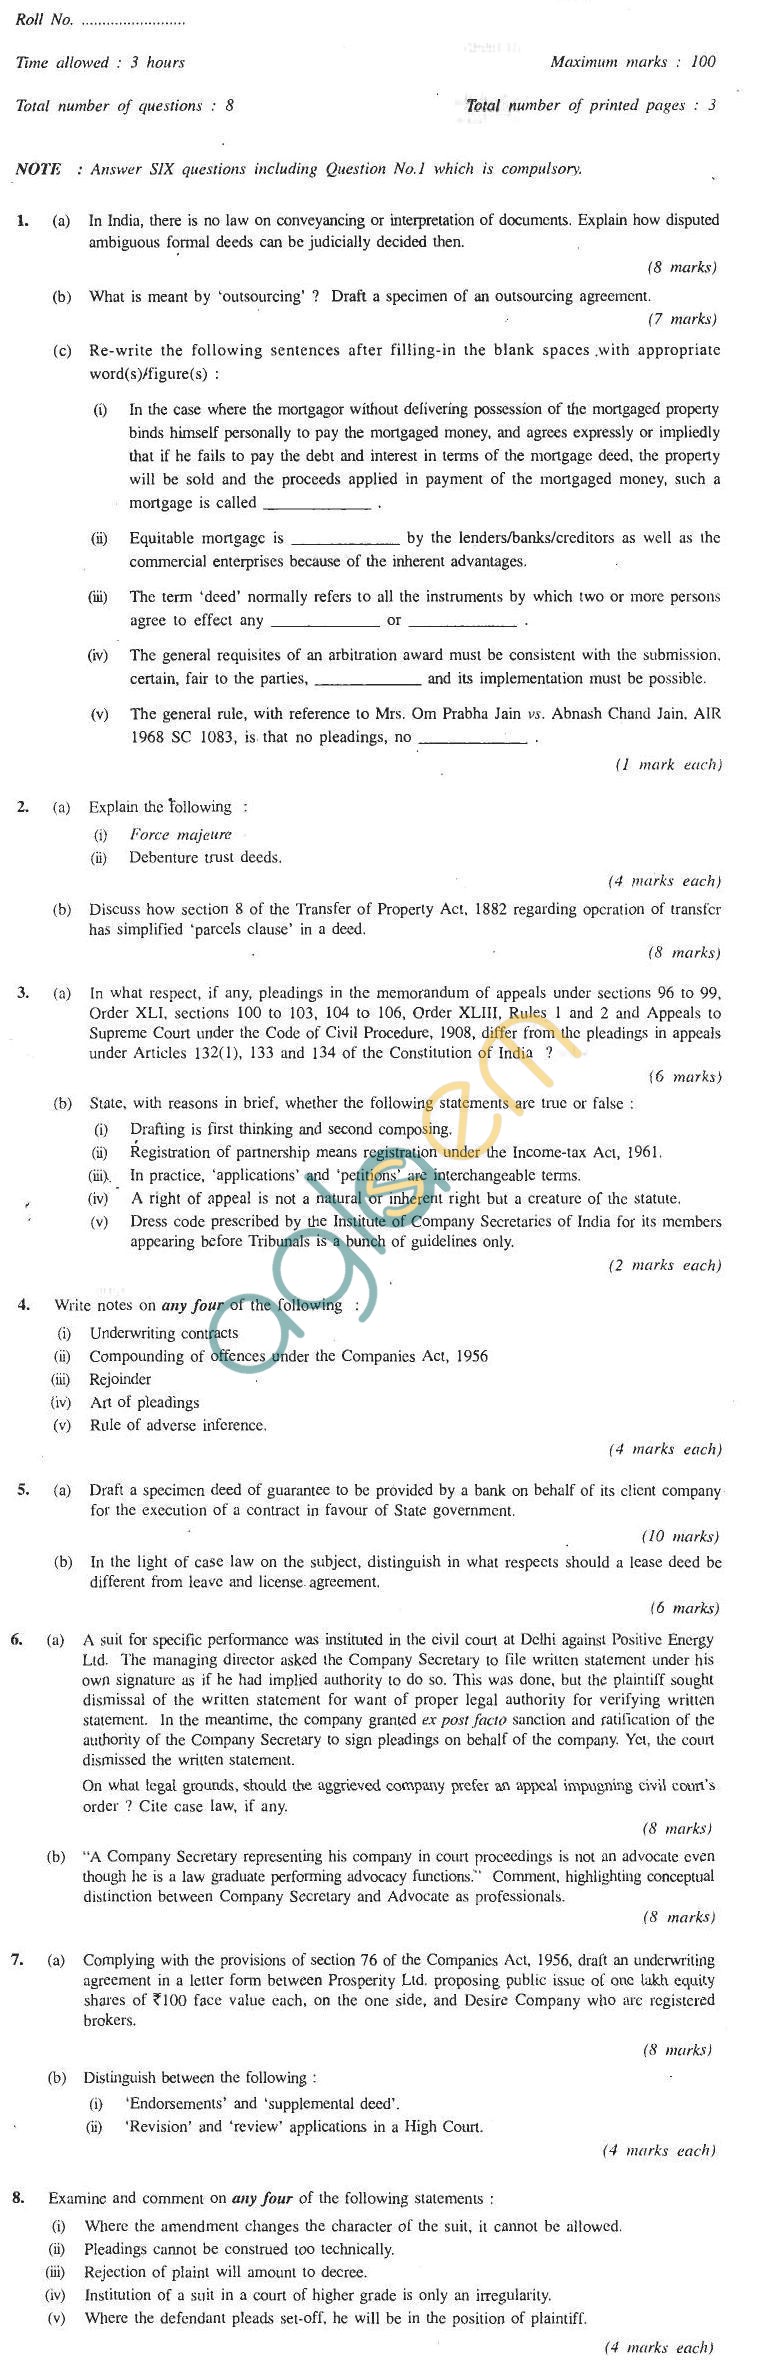 CS Professional Question Papers Jun 2011 - Financial Treasury and Forex Management Module II